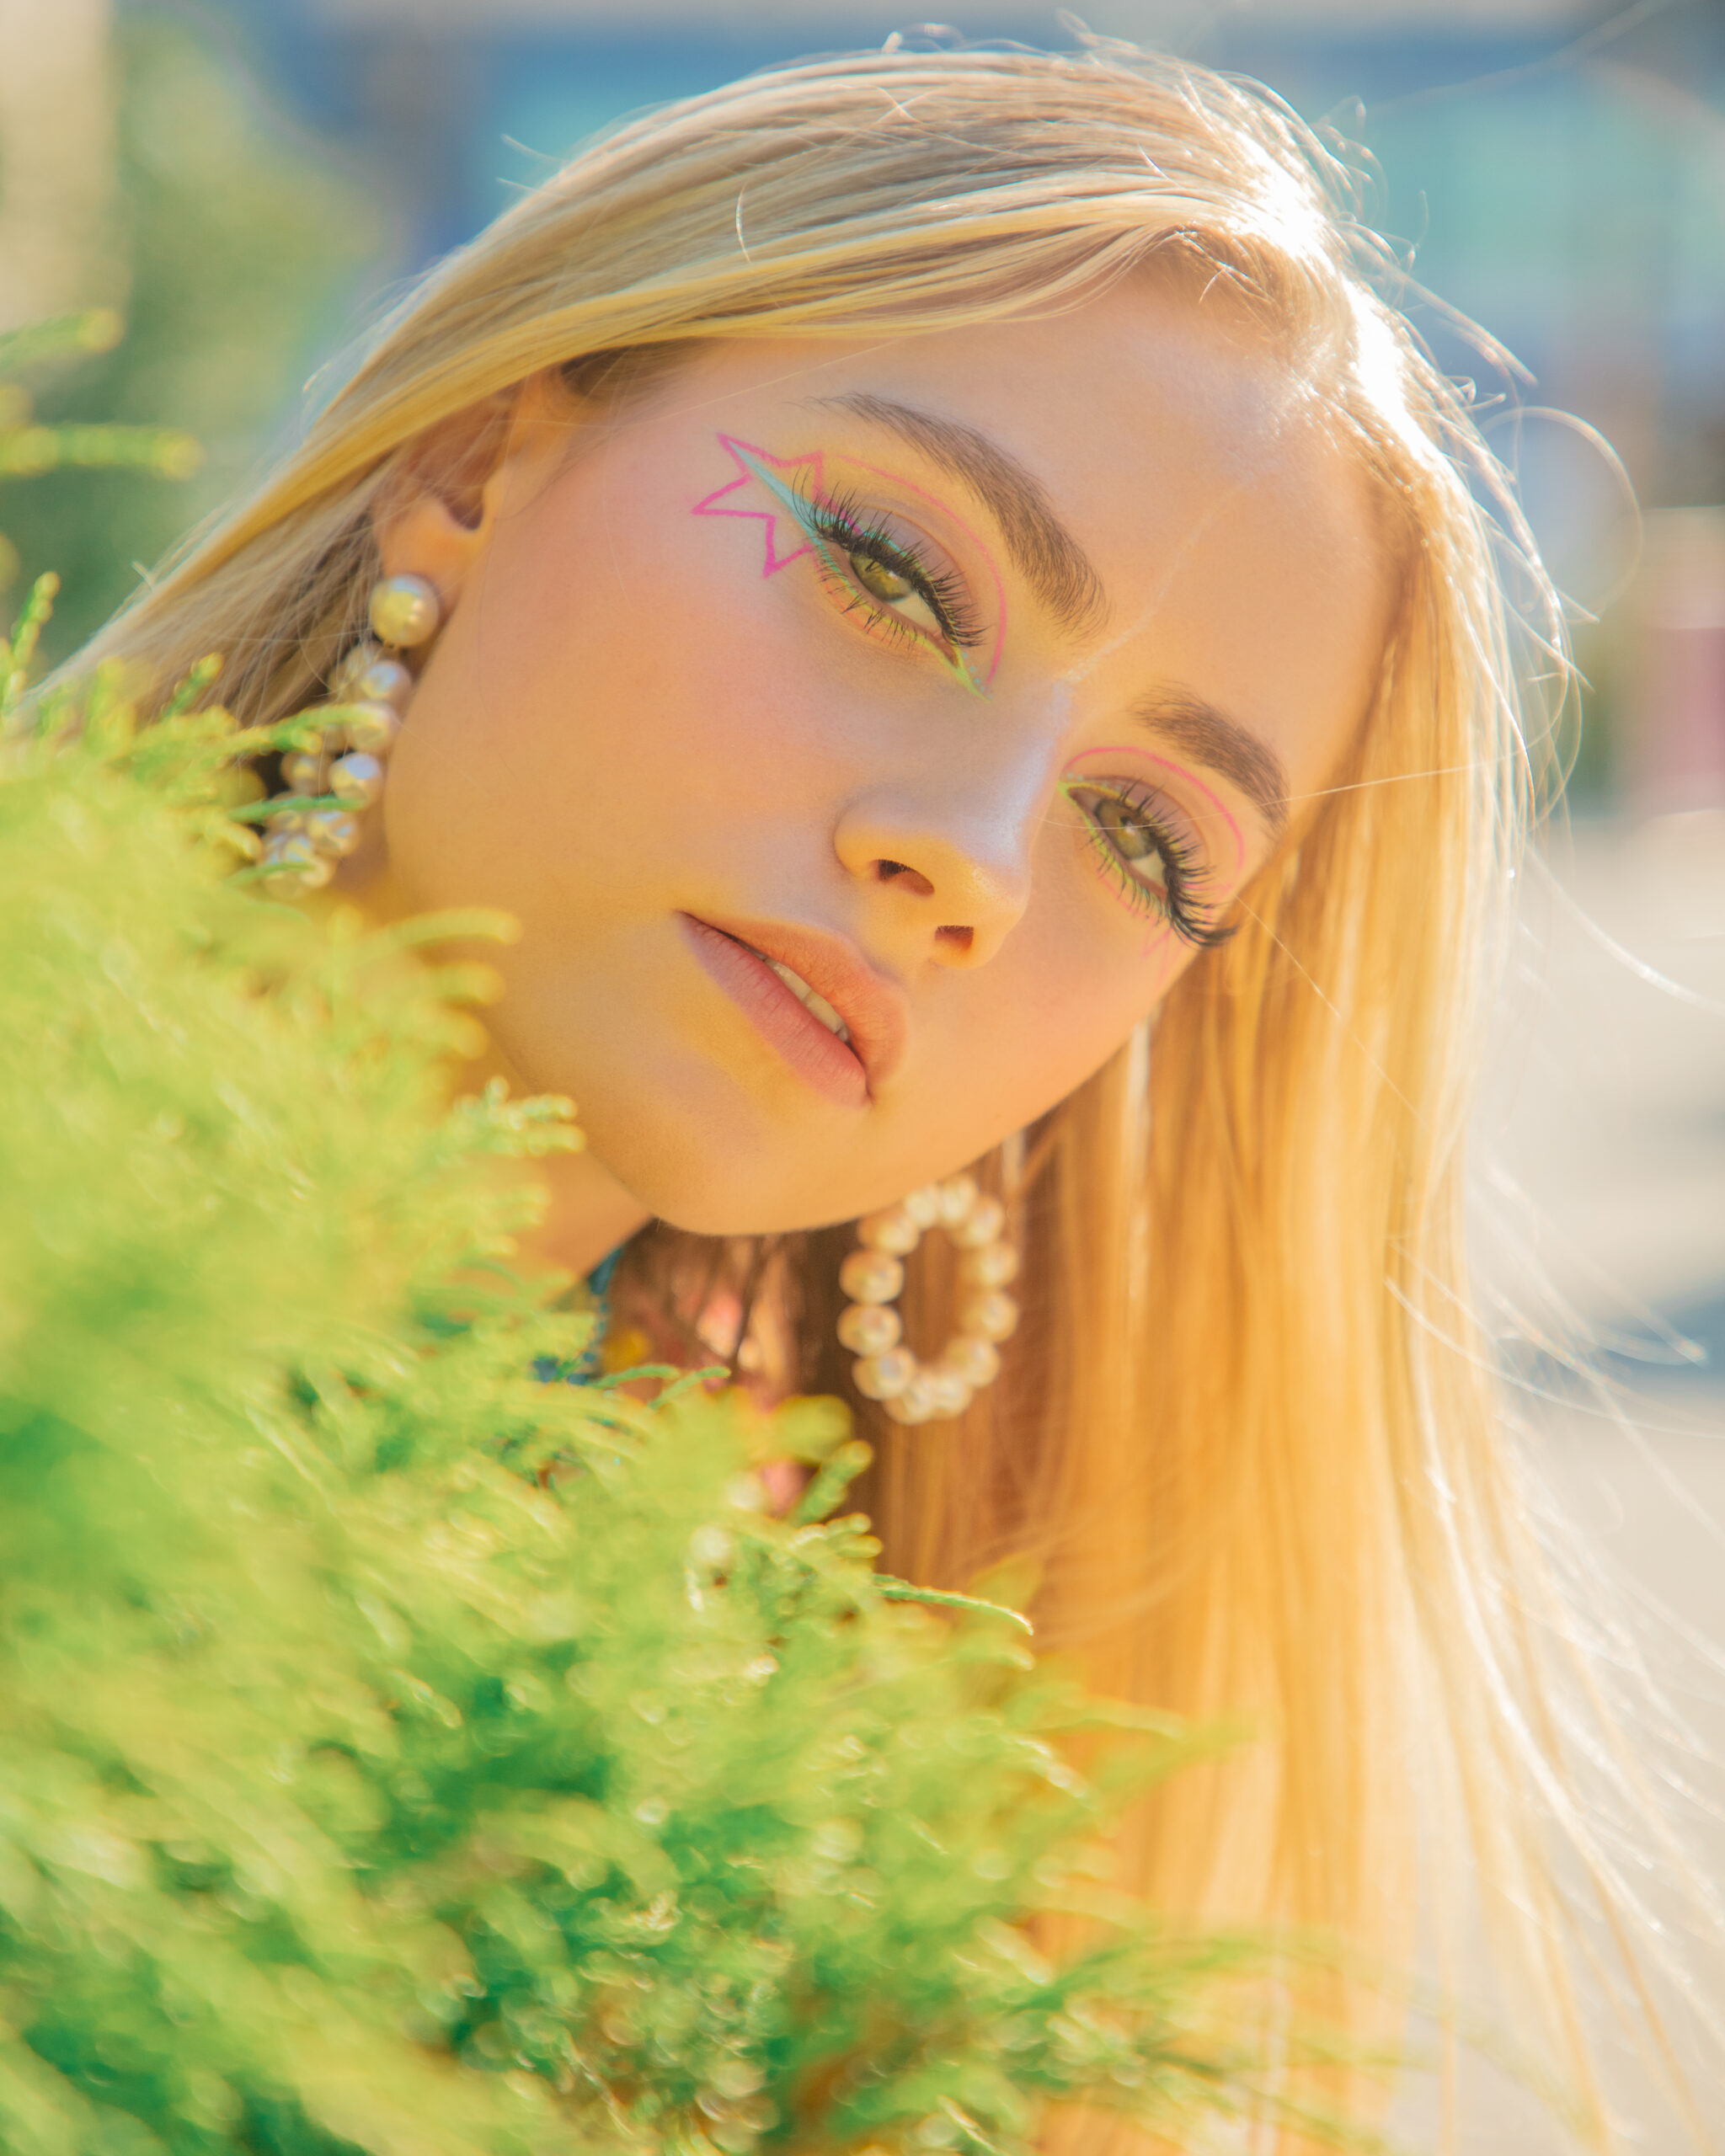 The image is a close-up portrait of a woman with blonde hair and creative makeup featuring a pink star near her right eye. She is wearing large pearl hoop earrings and there's a soft focus on greenery in the foreground. The background is overexposed, giving the image a bright, airy feel. The woman is looking slightly to the side, and her facial expression is serene. The lighting on her face is soft and warm